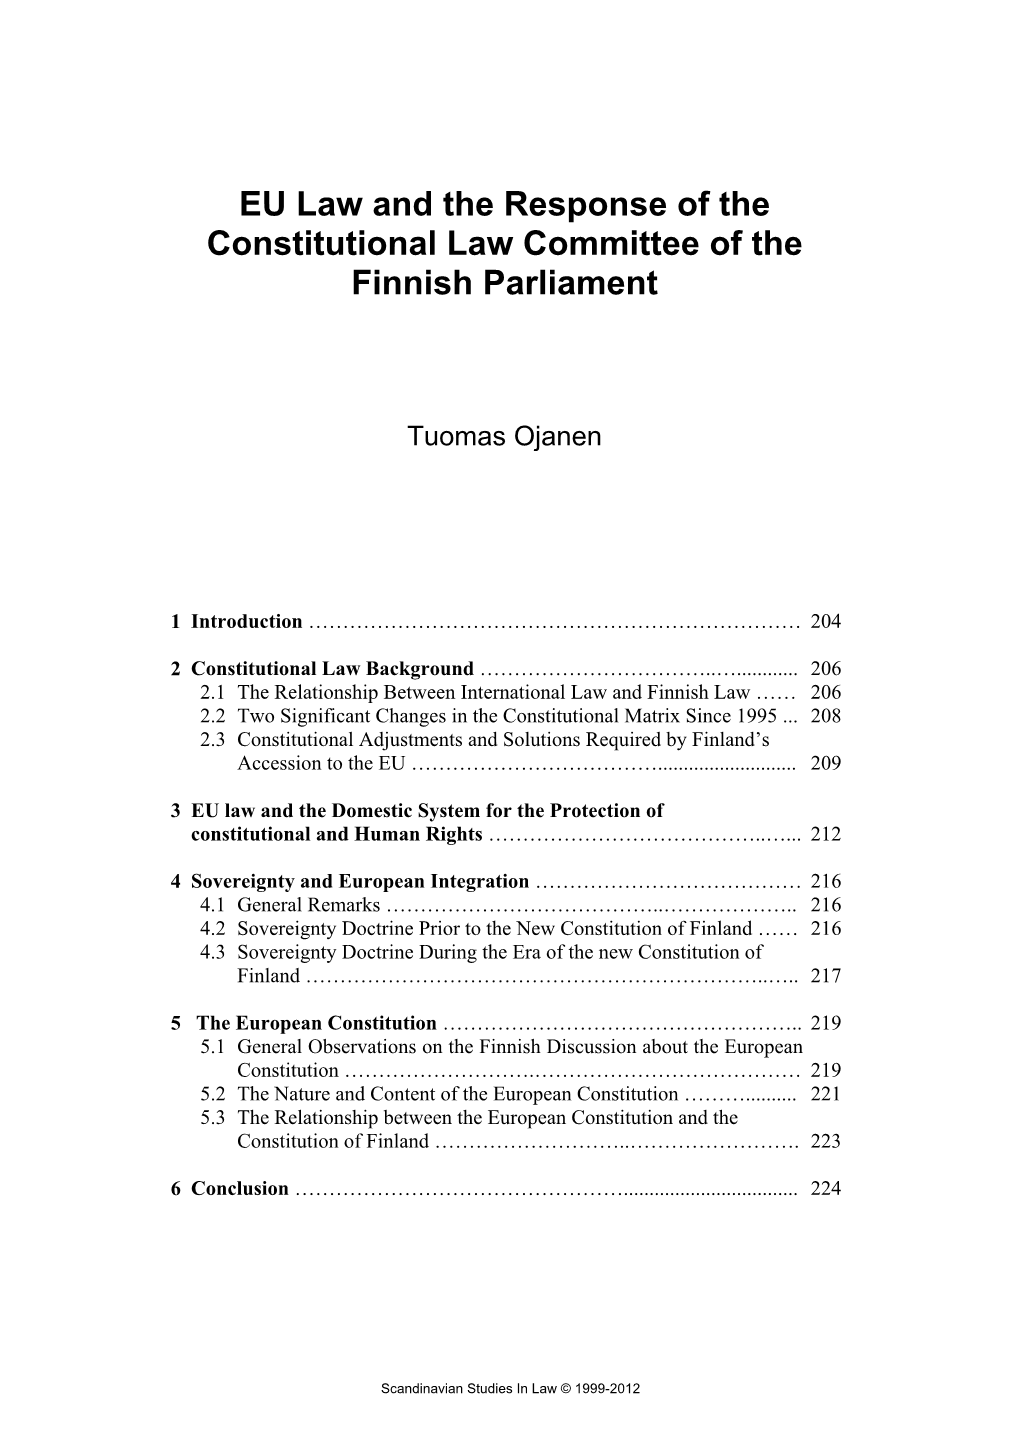 EU Law and the Response of the Constitutional Law Committee of the Finnish Parliament